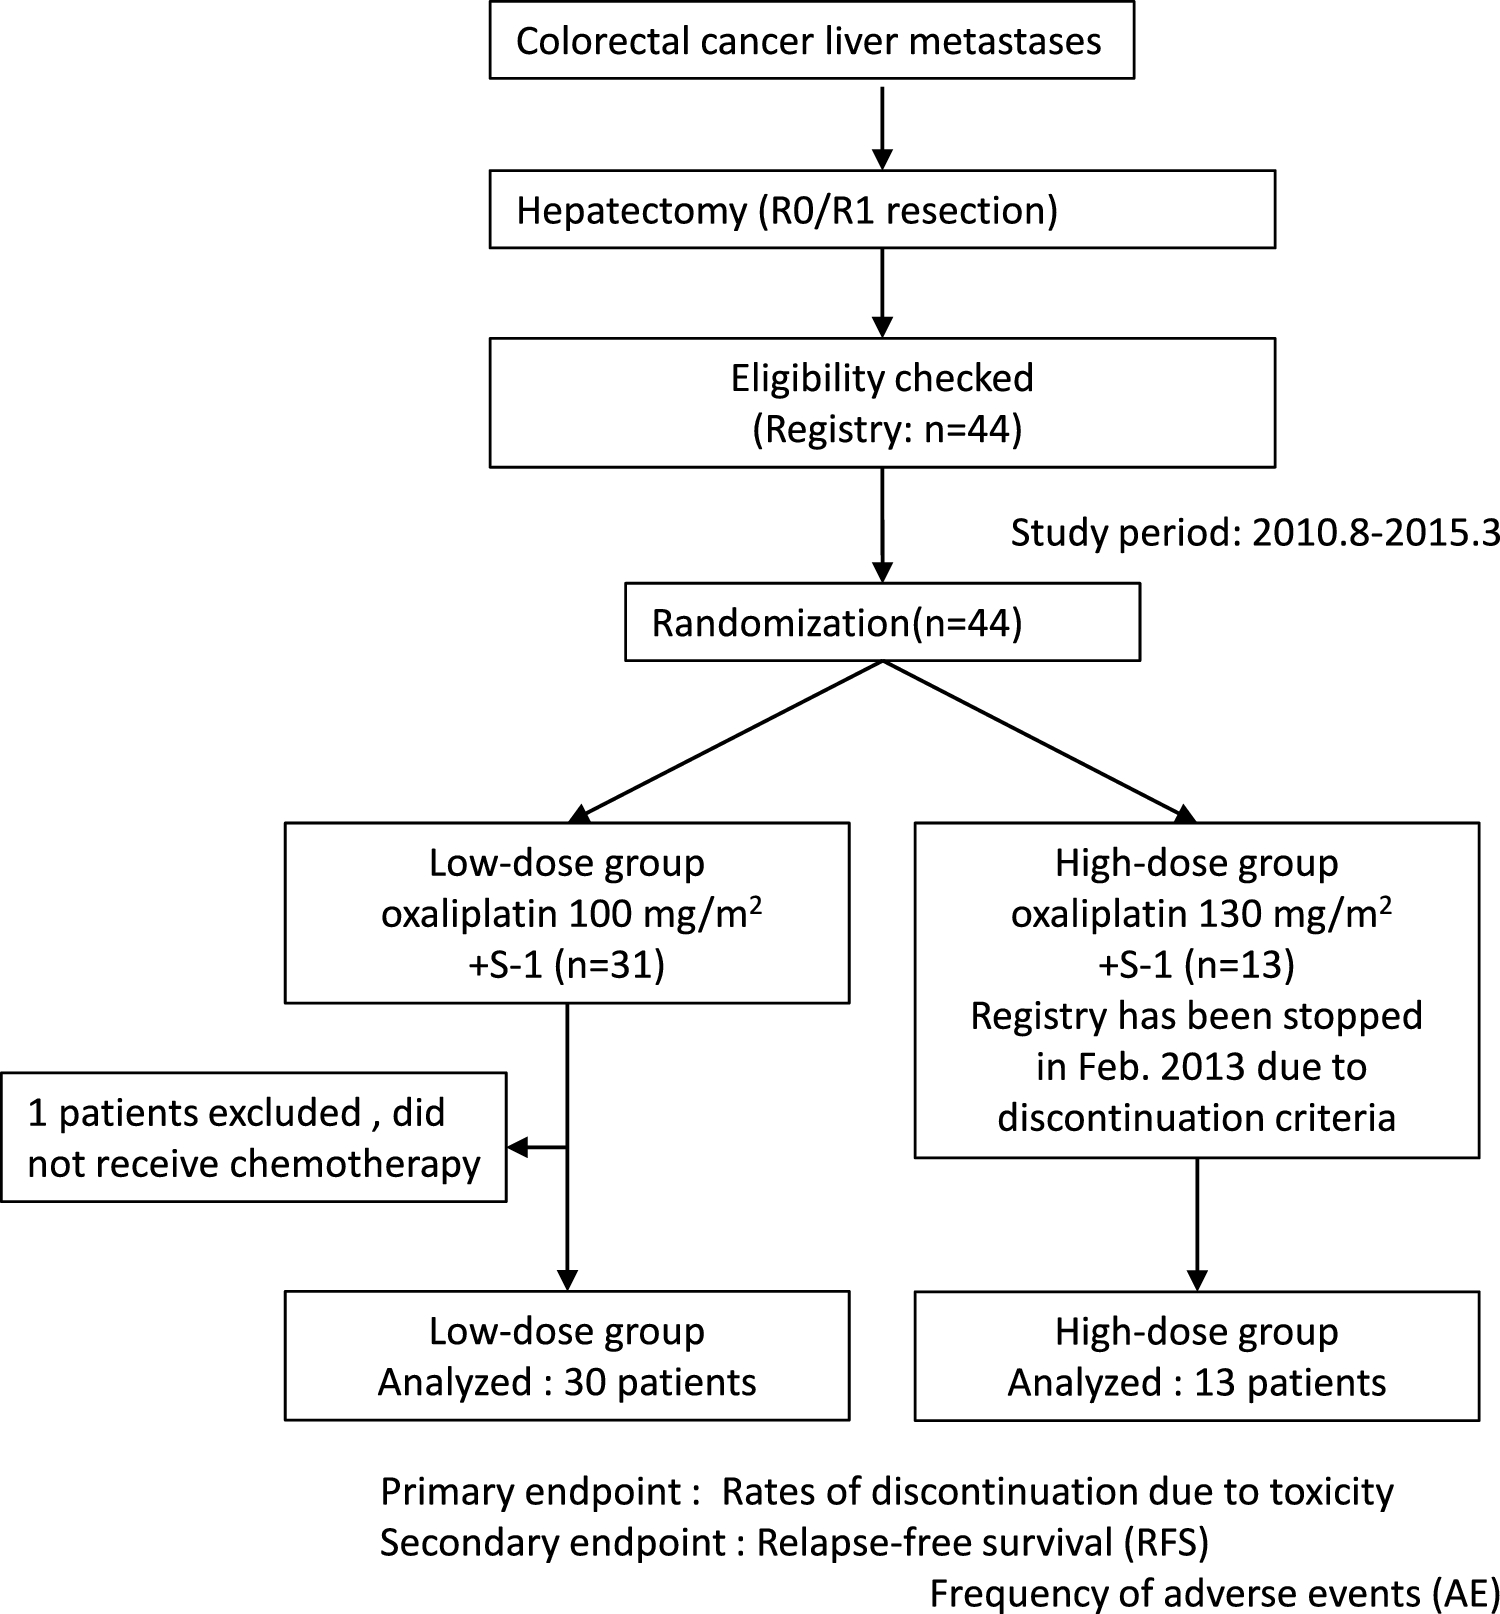 Multicenter randomized phase II study on S-1 and oxaliplatin therapy as an adjuvant after hepatectomy for colorectal liver metastases (YCOG1001)